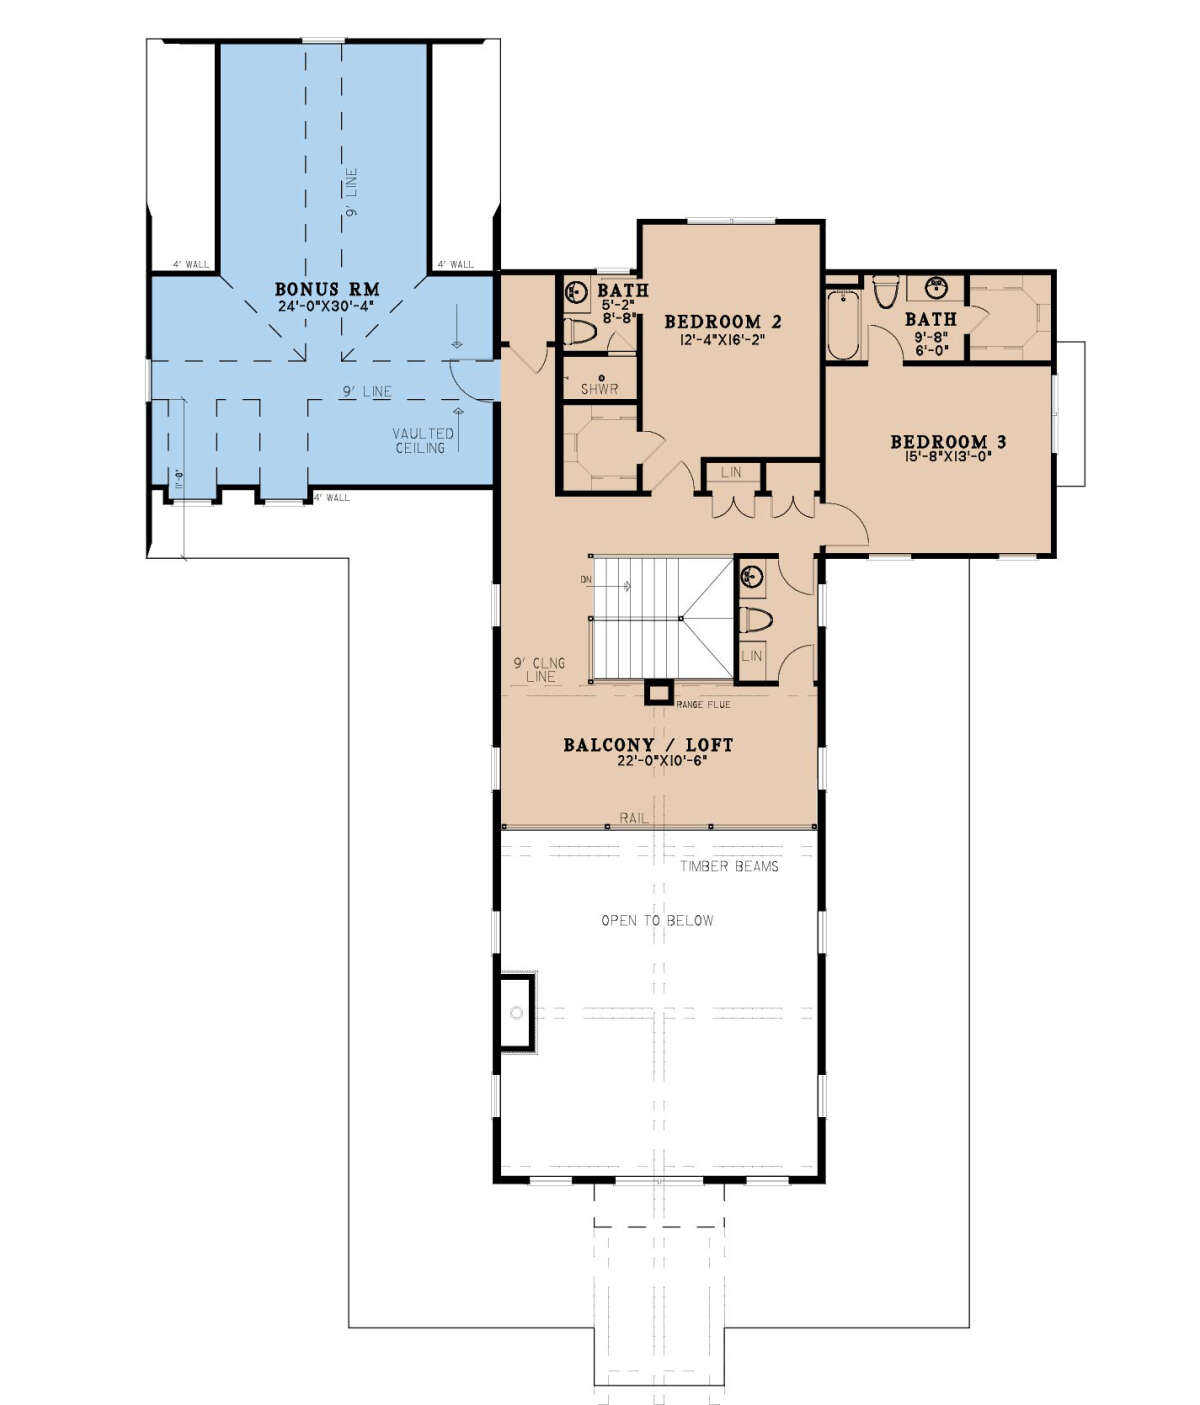 Second Floor for House Plan #8318-00264